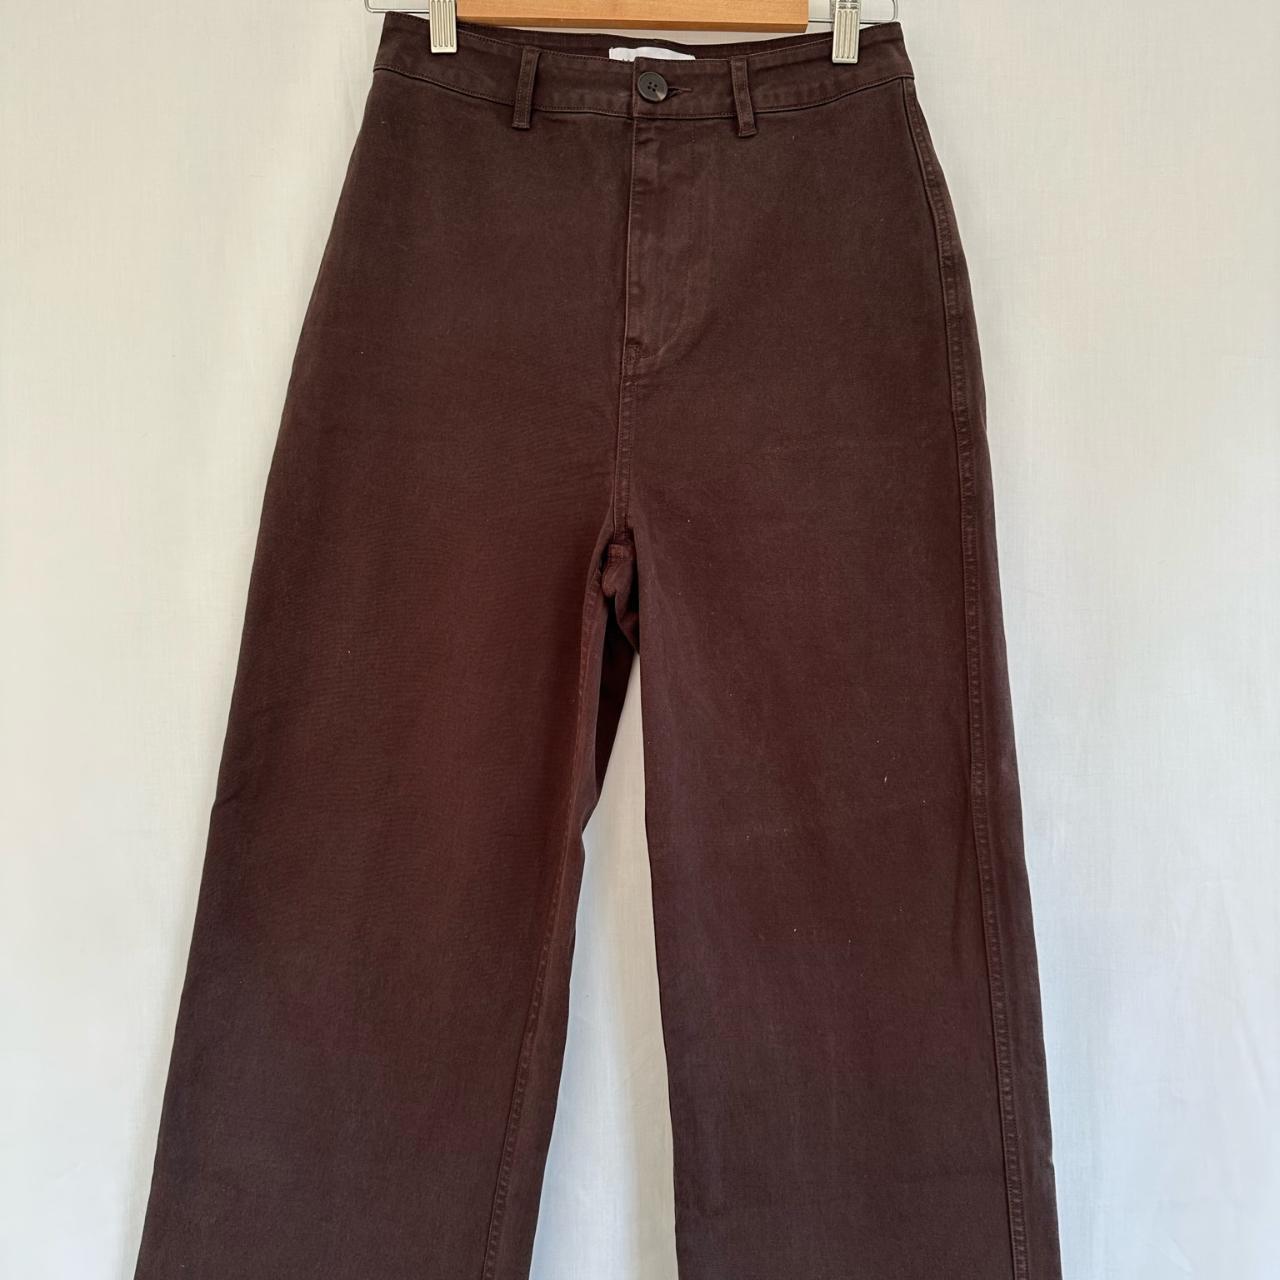 Assembly Label Hana Twill Pant in Cocoa Size... - Depop